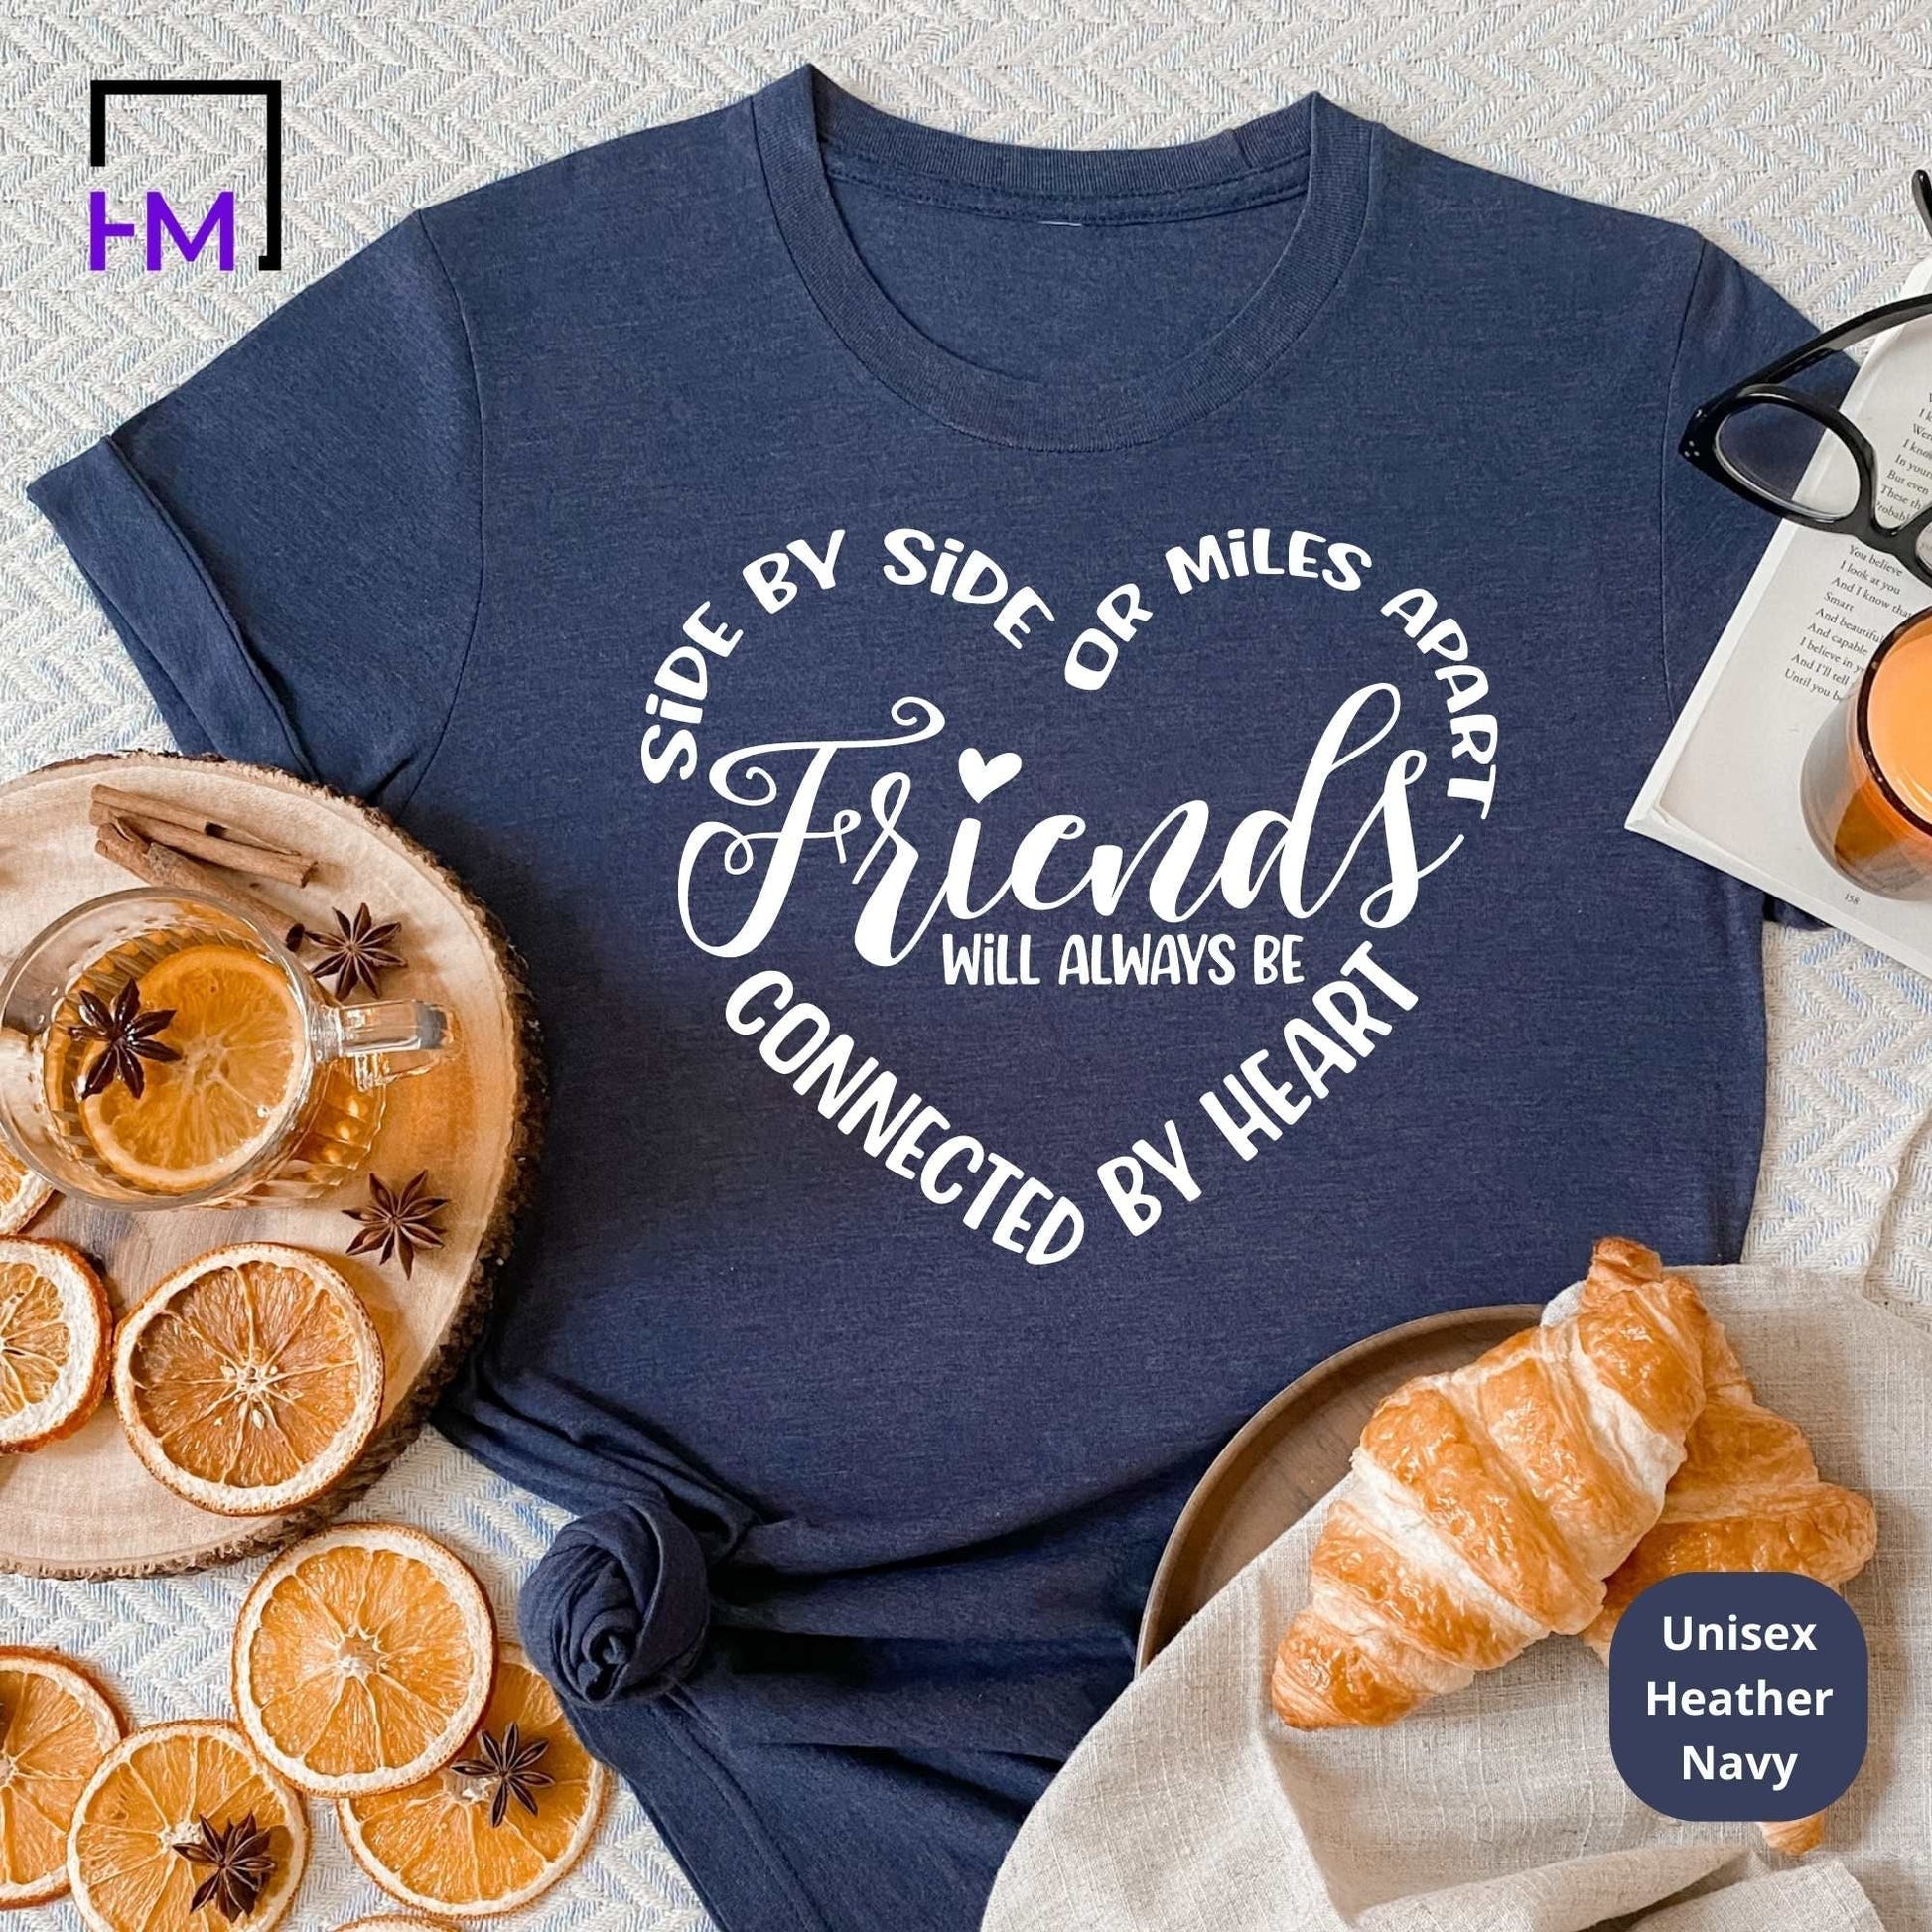 Capture the memories your Bestie with our Friends Shirts. Shop –